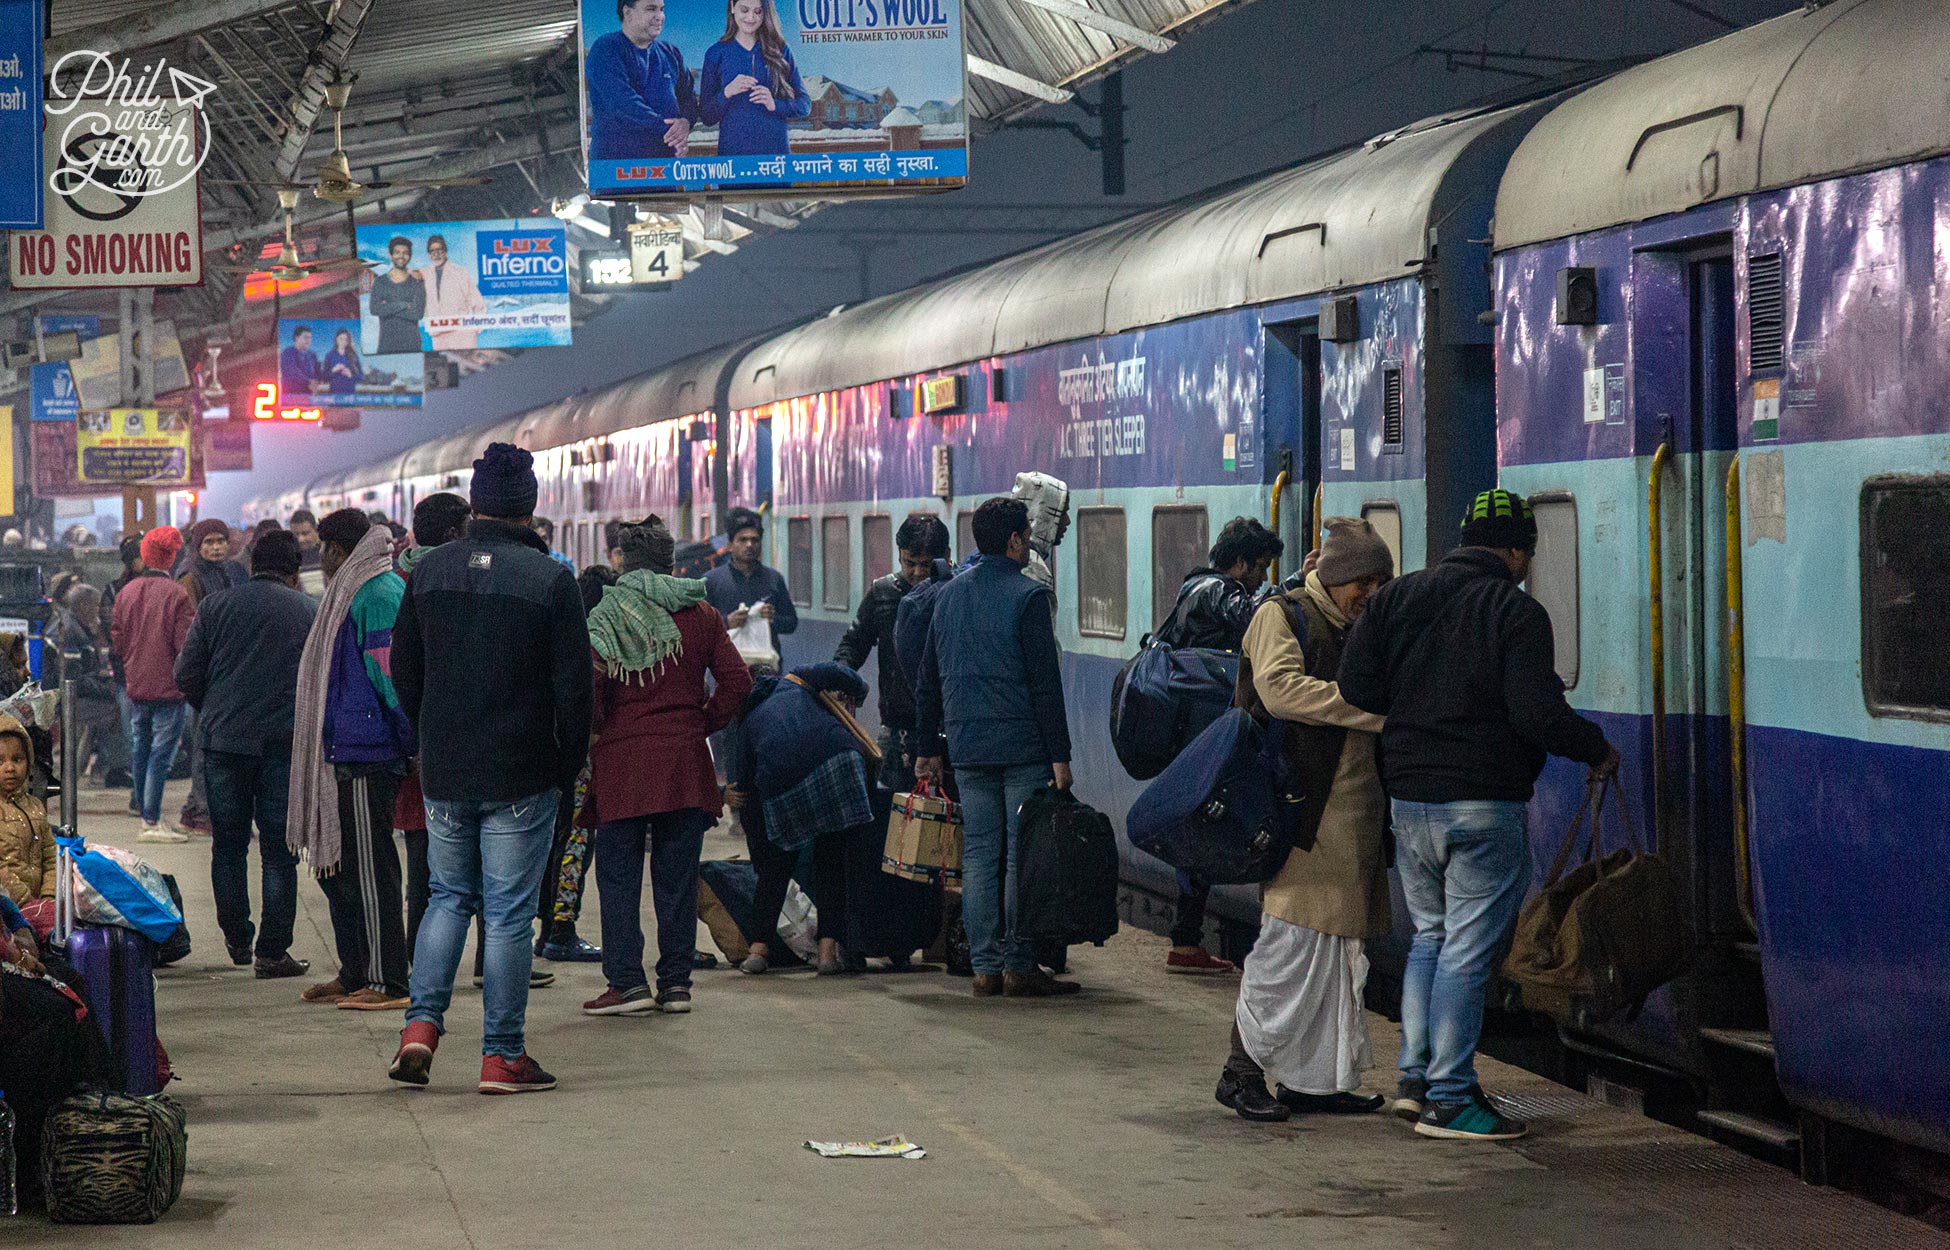 People getting onto a sleeper train in India